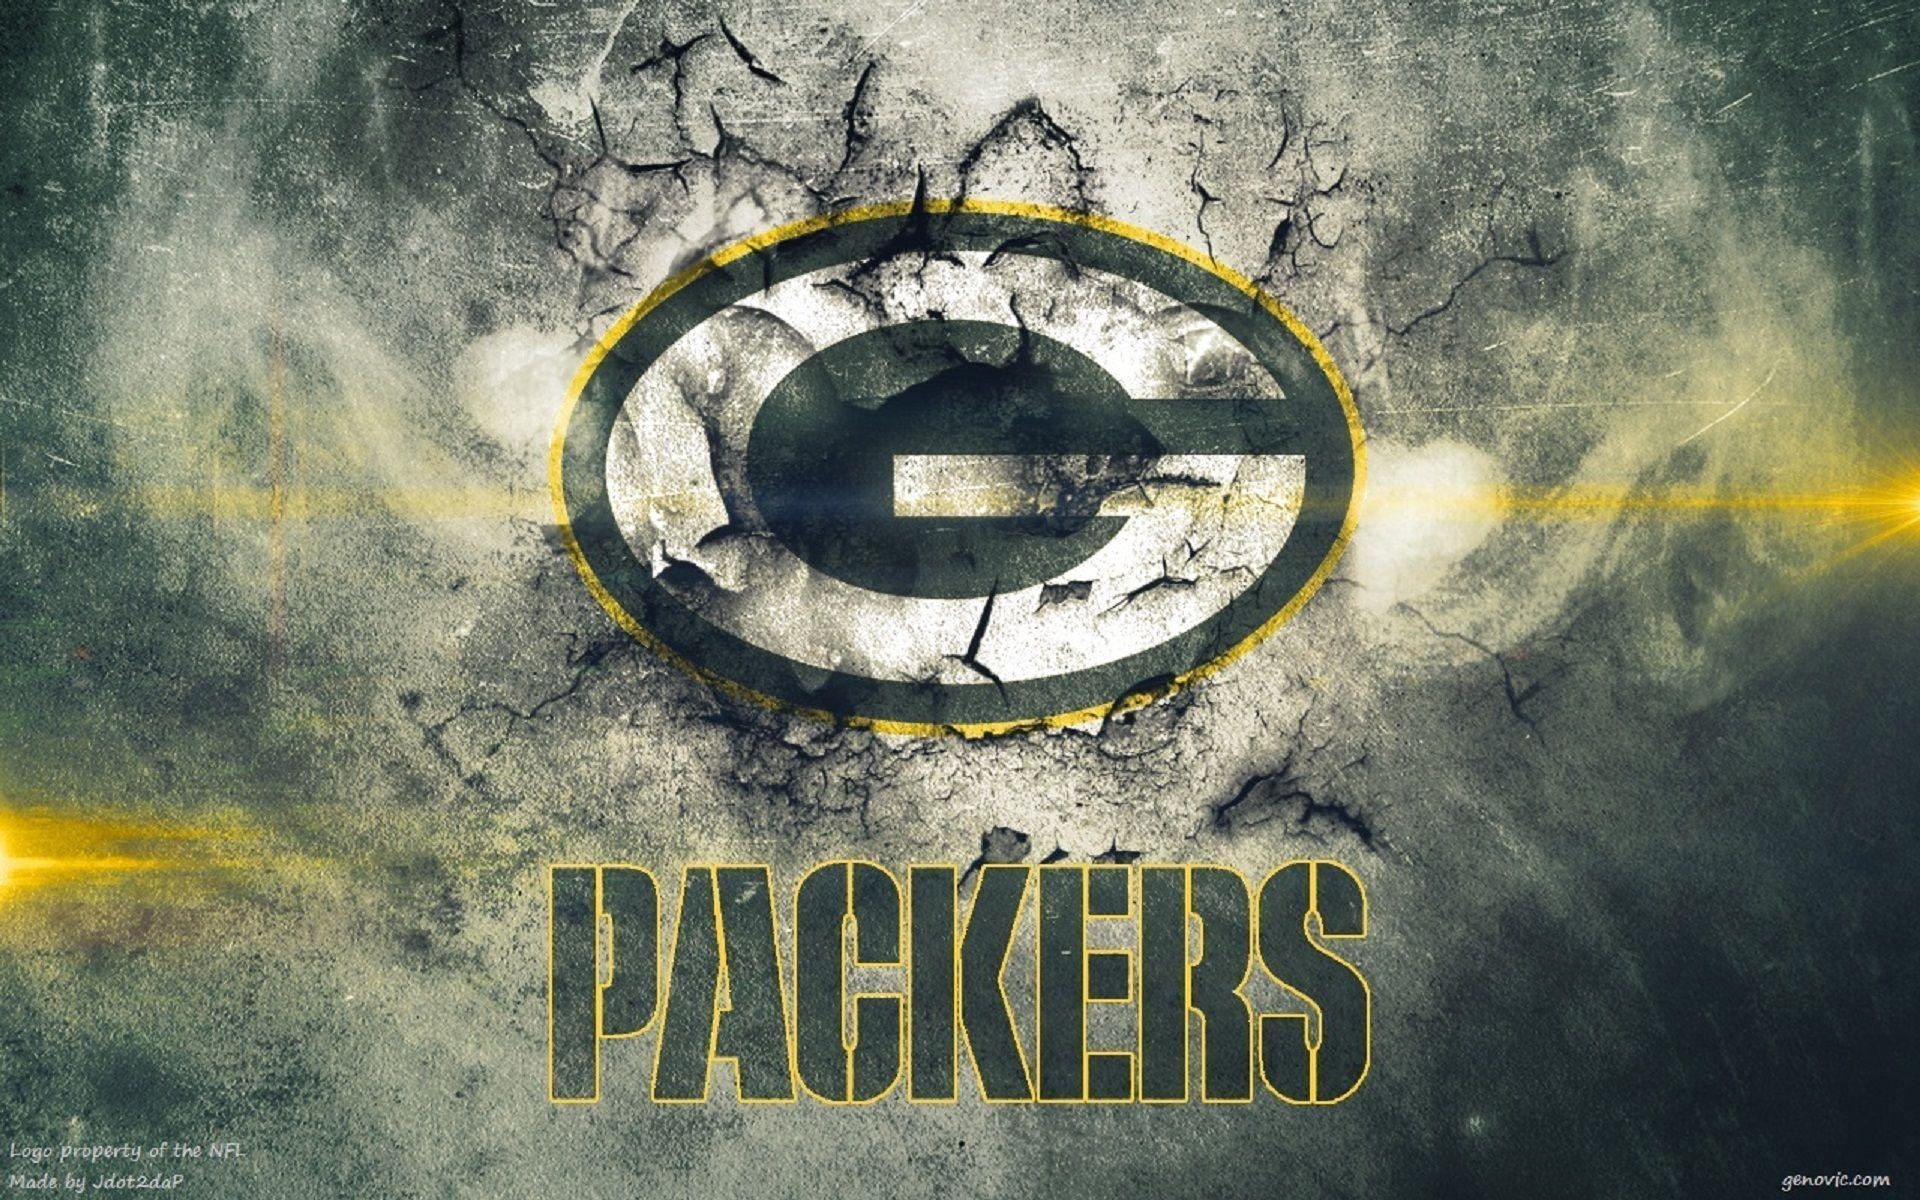 green bay packers wallpapers - wallpaper cave